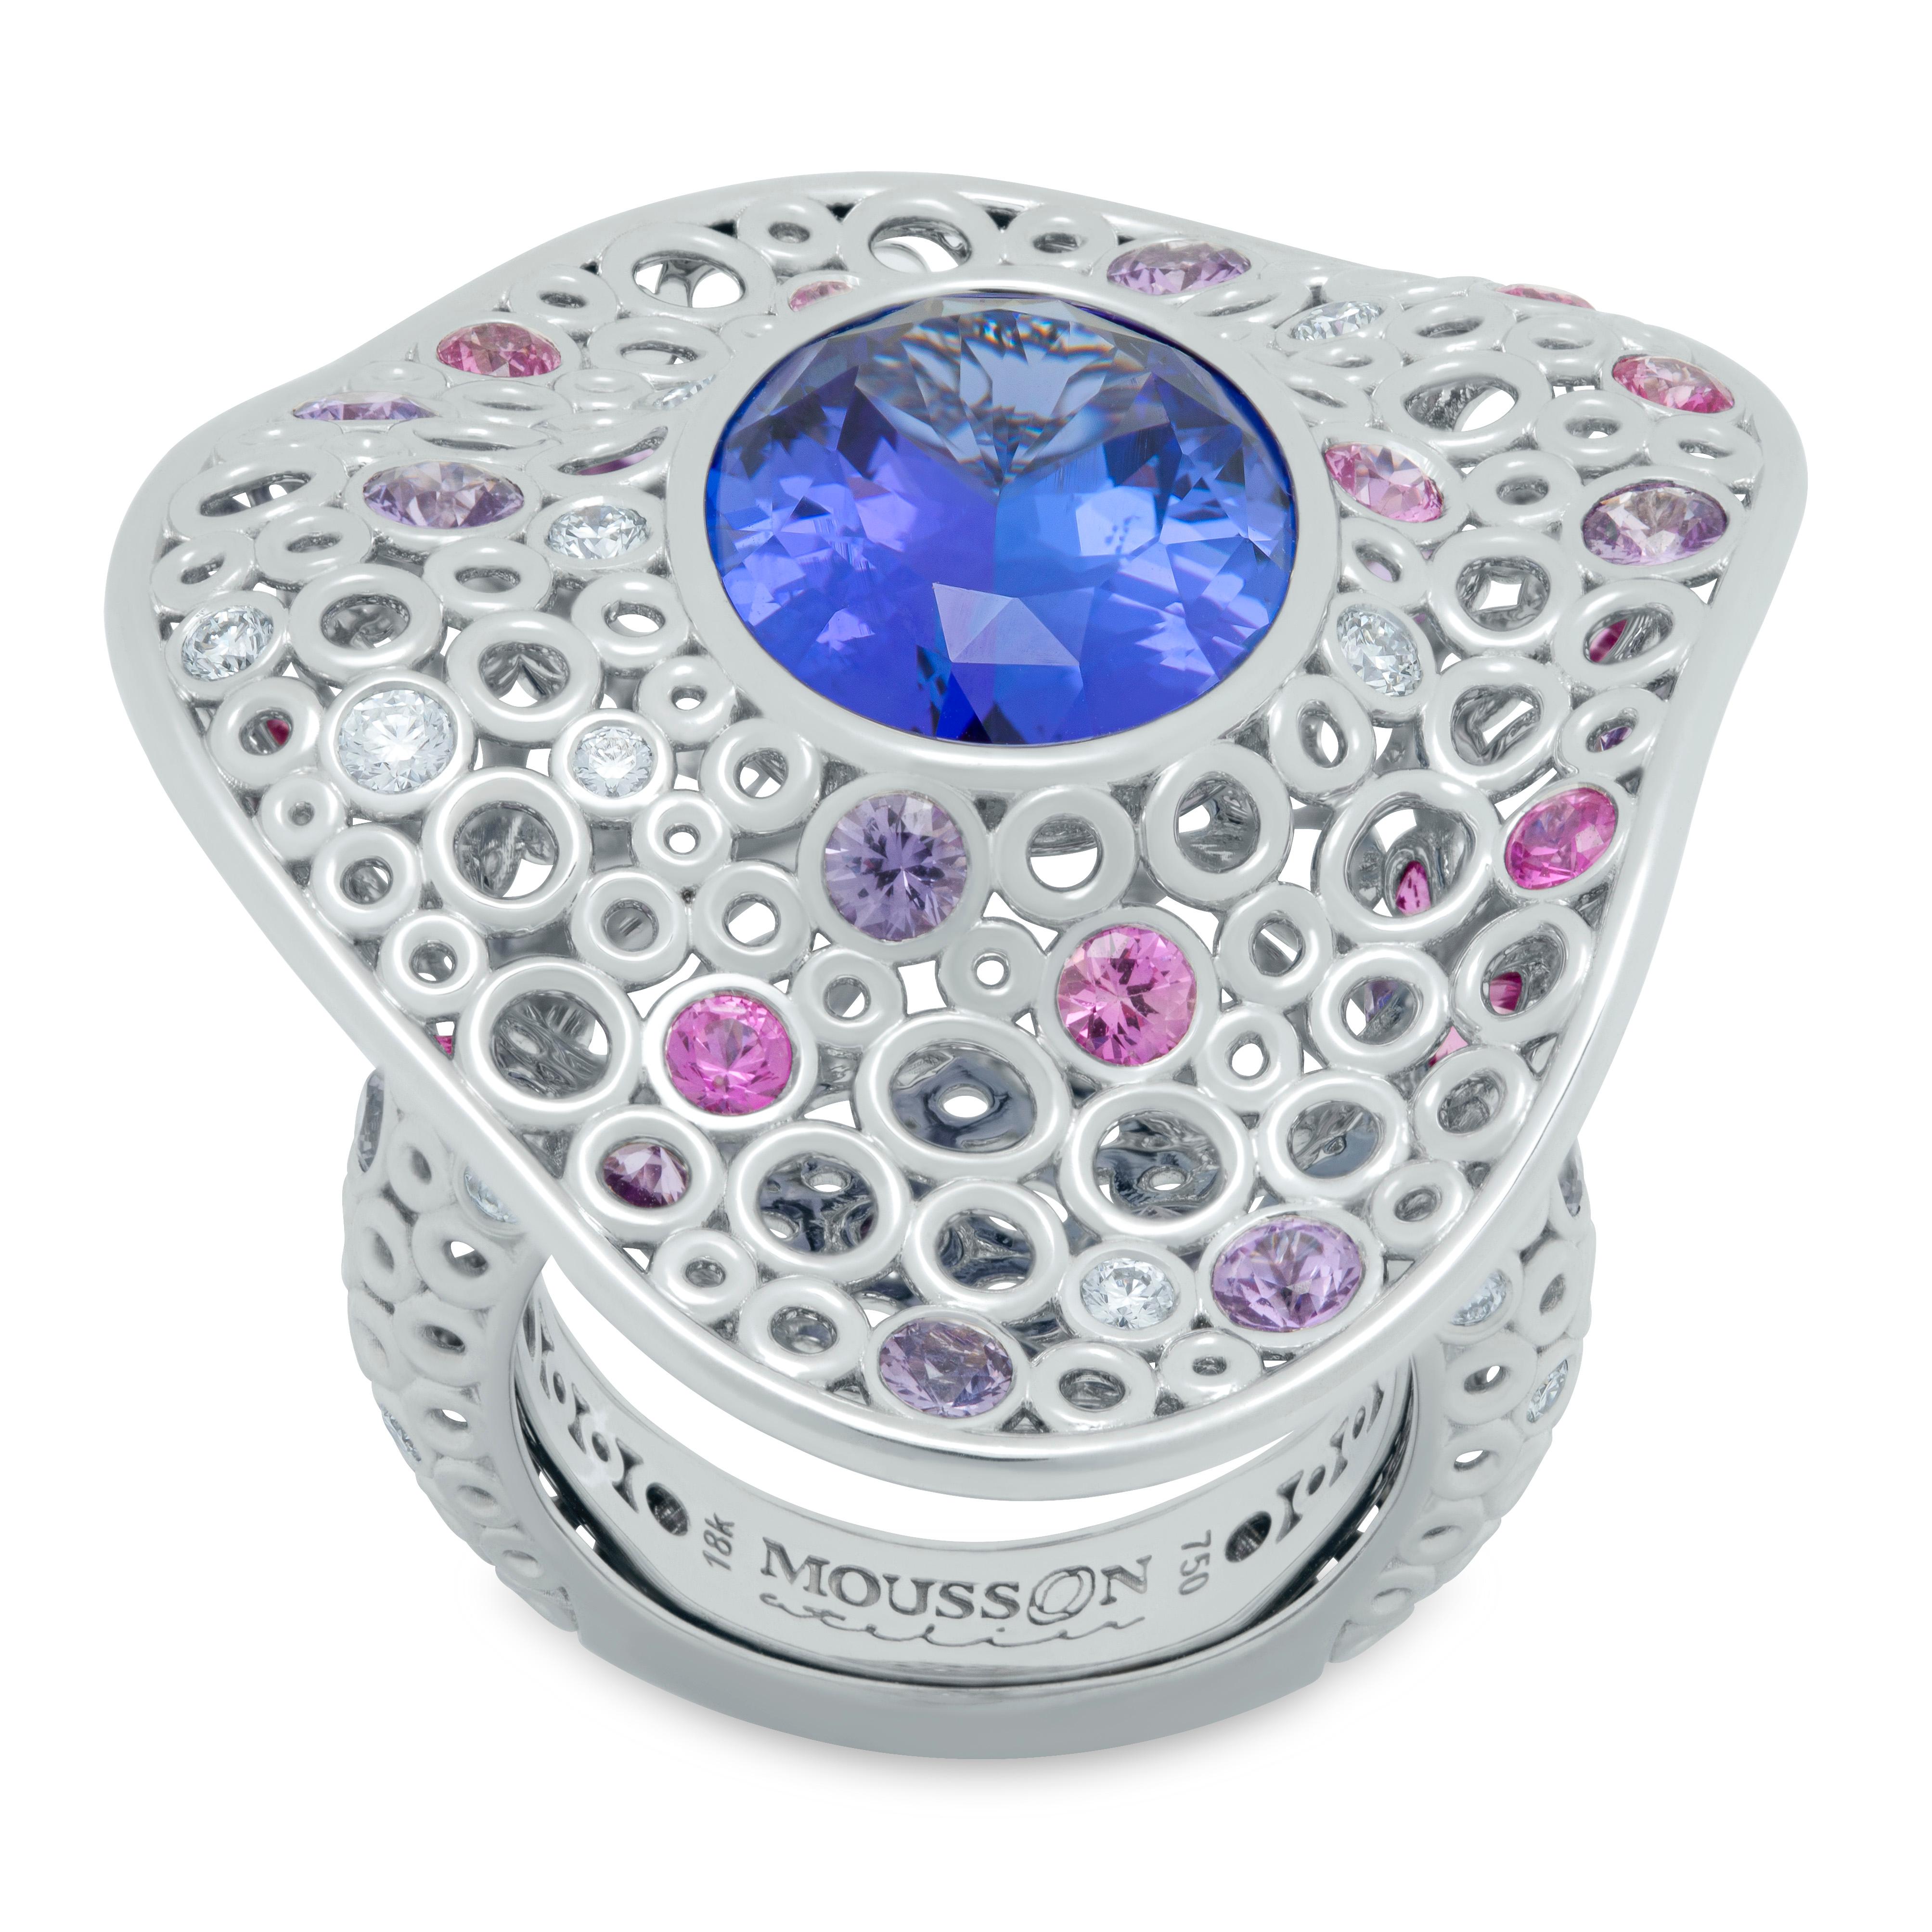 Tanzanite 12.42 Carat Diamonds Sapphires 18 Karat White Gold Bubbles Ring
Incredibly light and airy Ring from our Bubbles Collection. White 18 Karat Gold is made in the form of variety of small bubbles, some of which have 23 Pink weighing 1.53 Carat